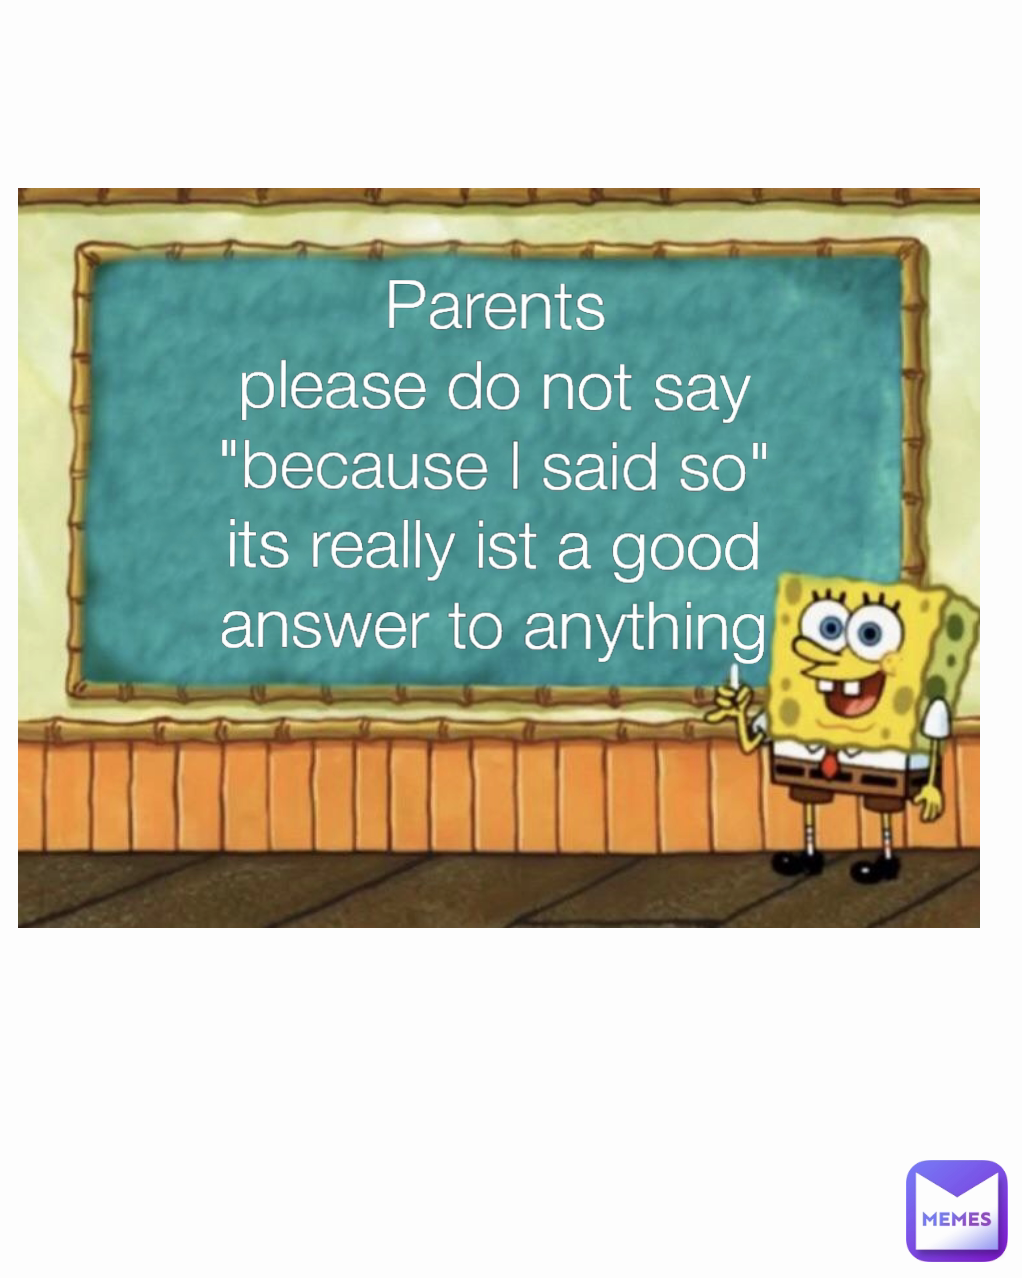 Parents
please do not say "because I said so"
its really ist a good answer to anything Type Text